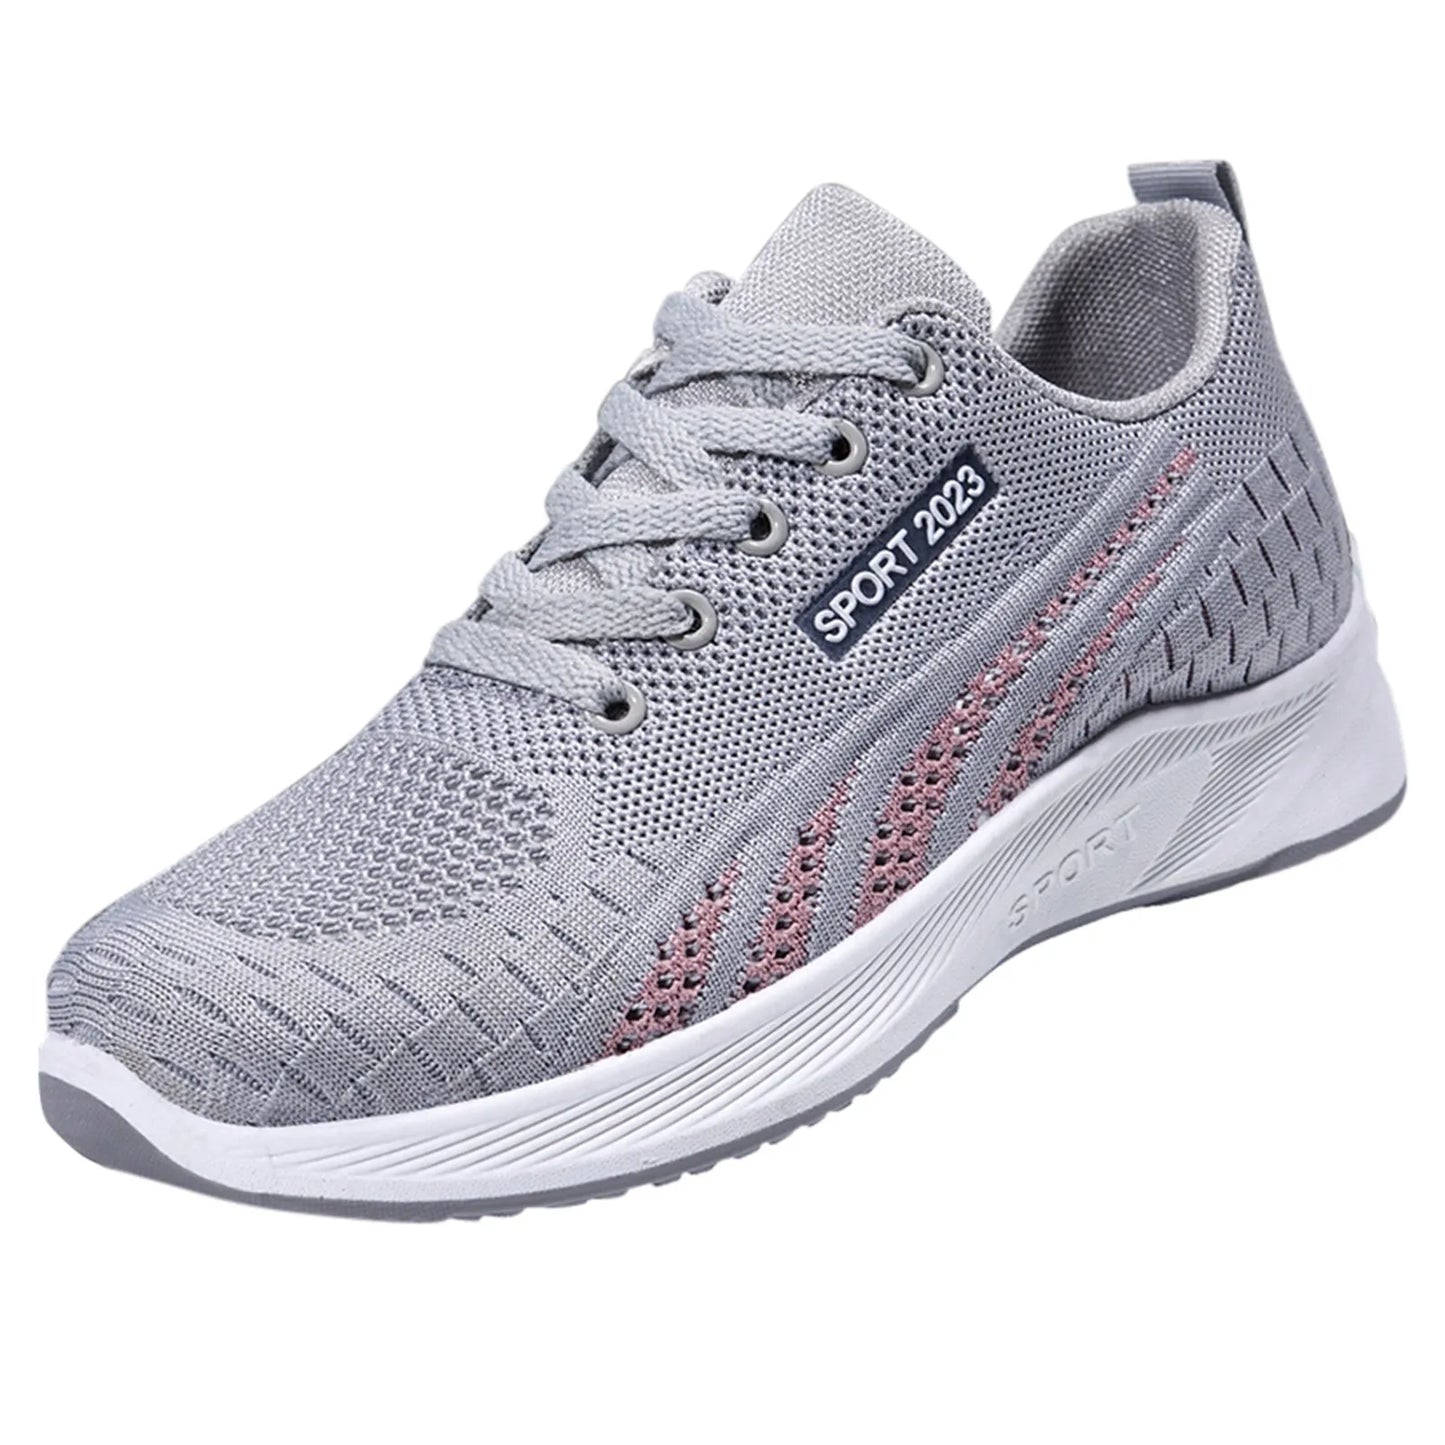 Tennis Shoes For Women Running Lace Up Round Toe Sports Shoes/Woman Platform Sneakers Ladies Shoes